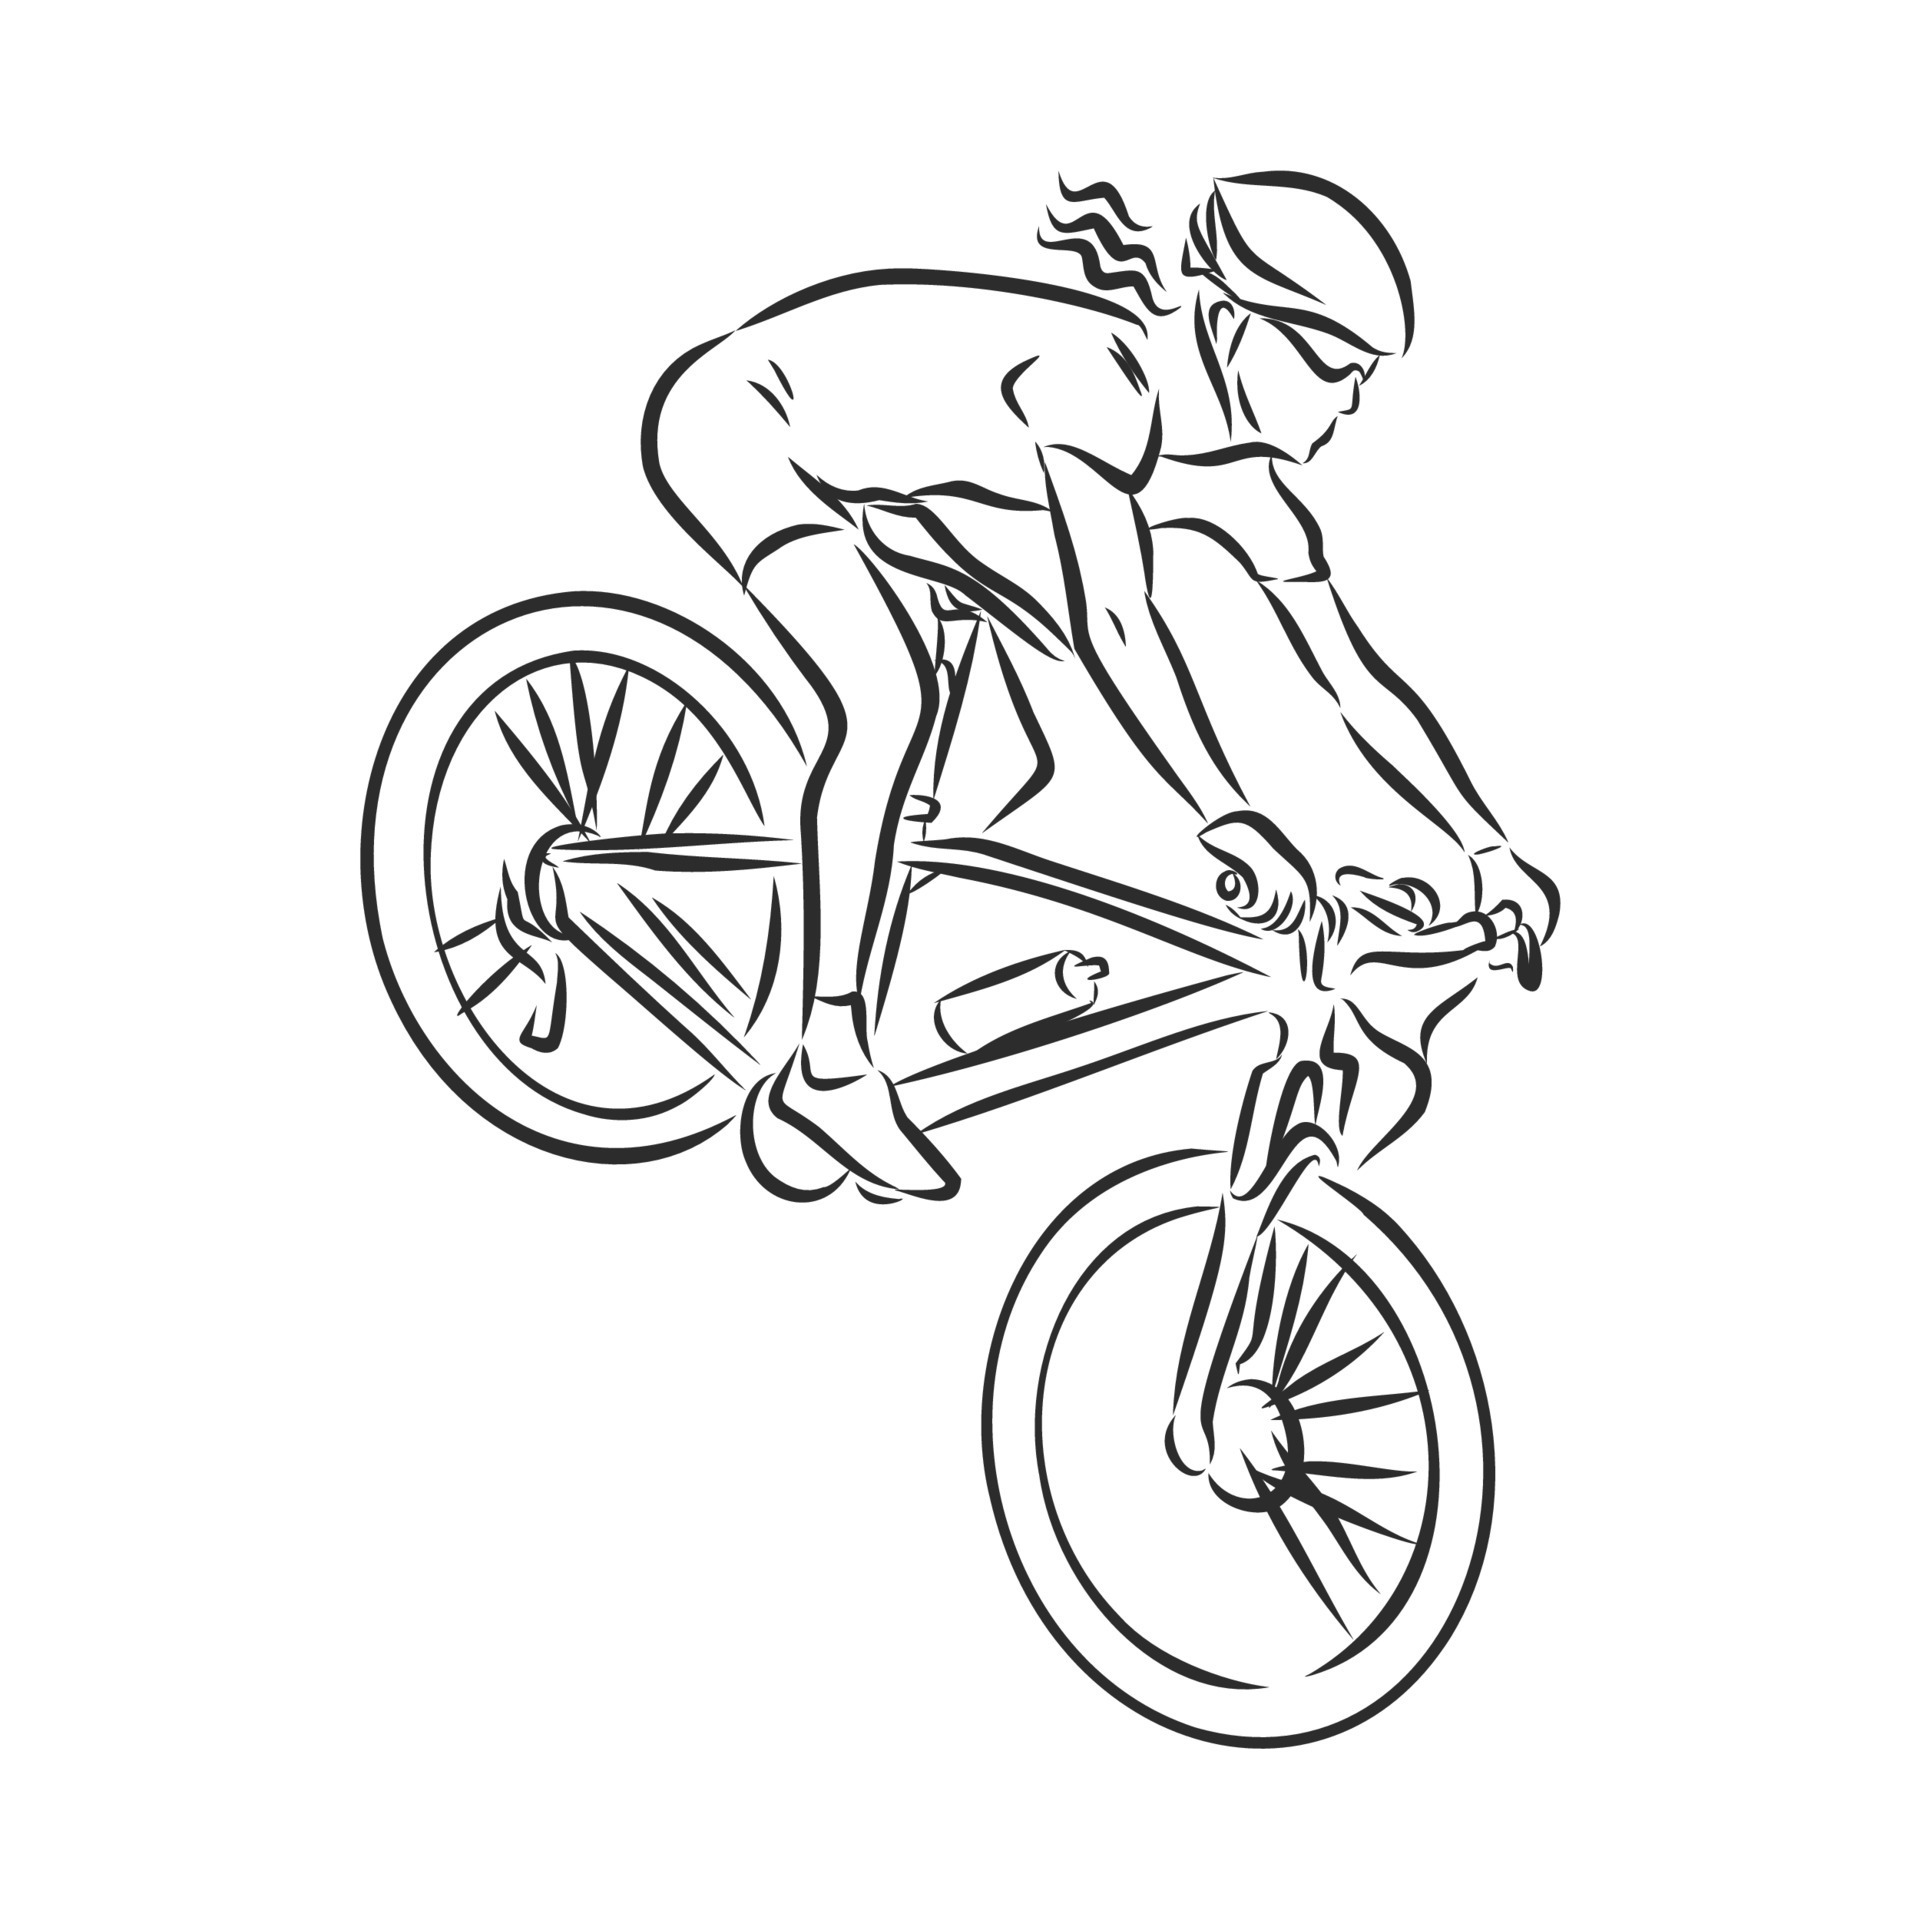 Sketch of the mountain bike competition hand draw  Stock Illustration  68347993  PIXTA